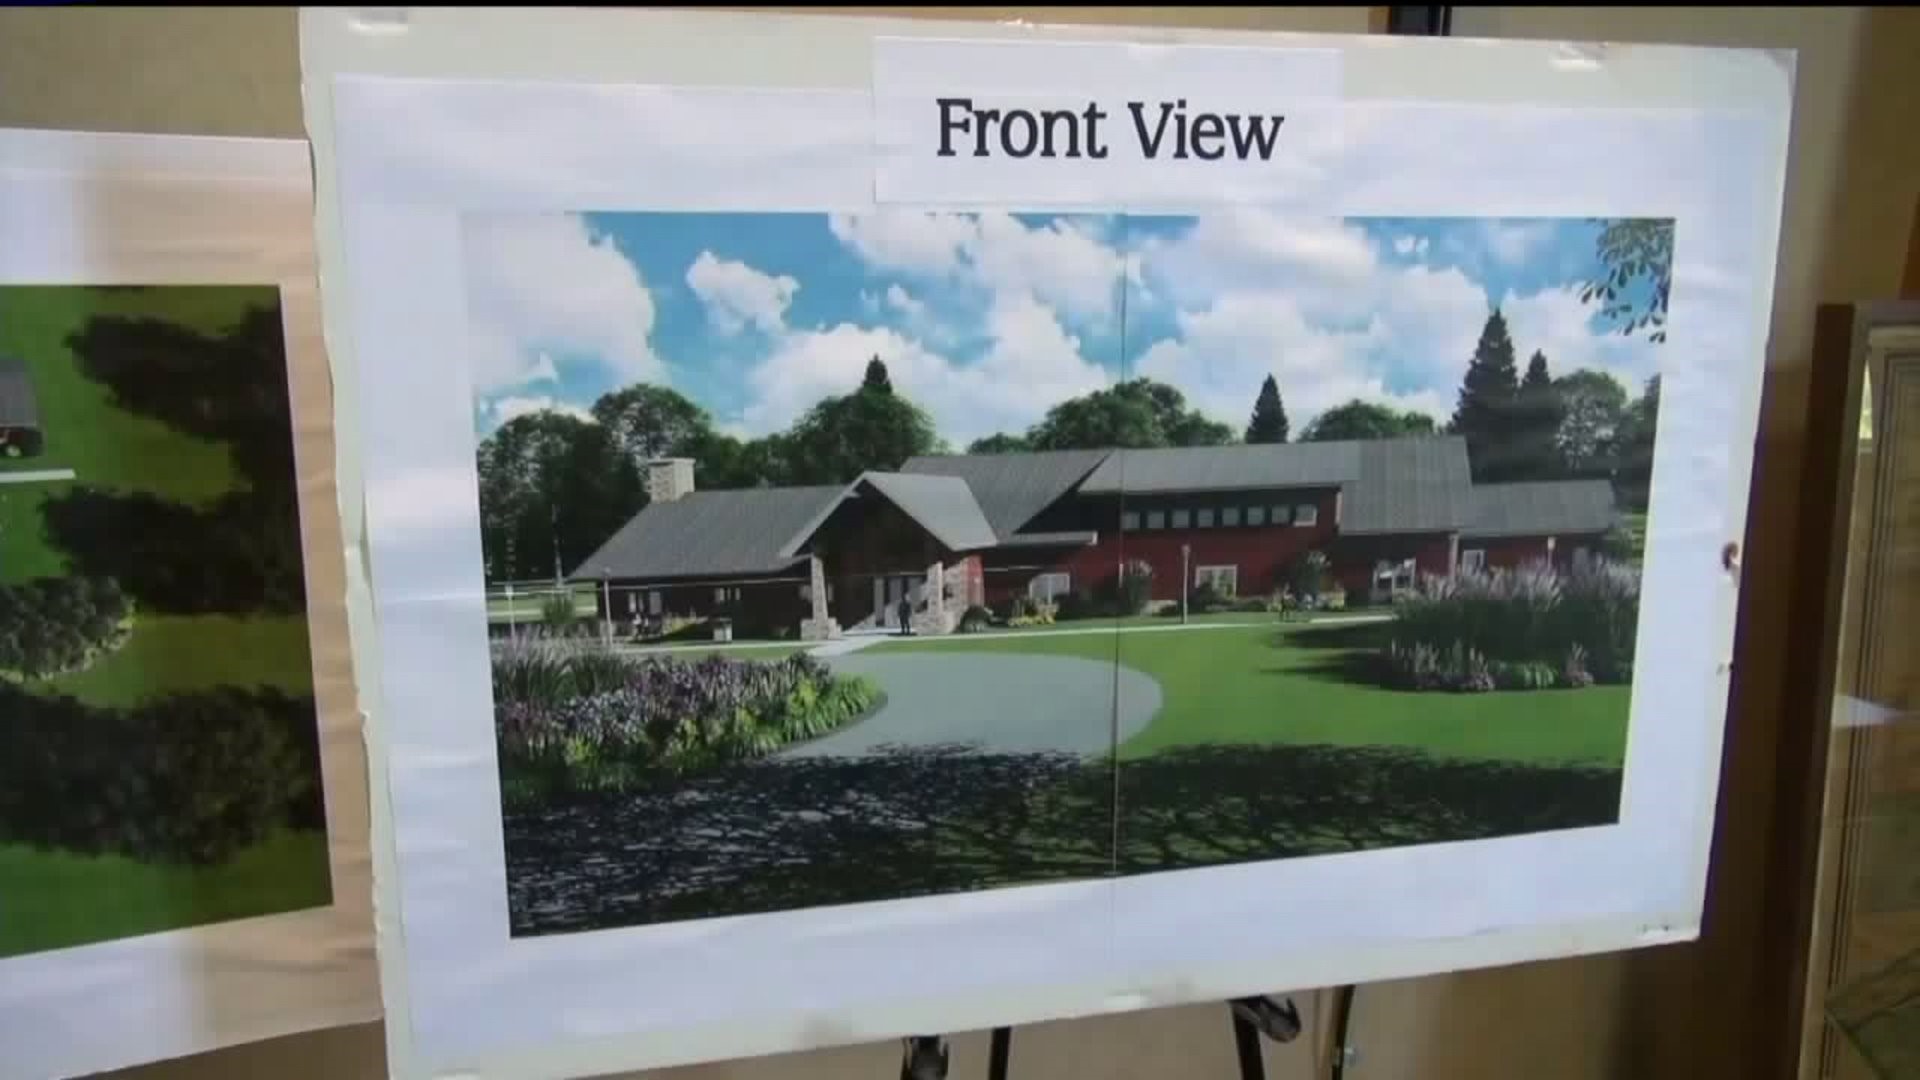 Community Center and Library Project Begins in Middle Smithfield Township